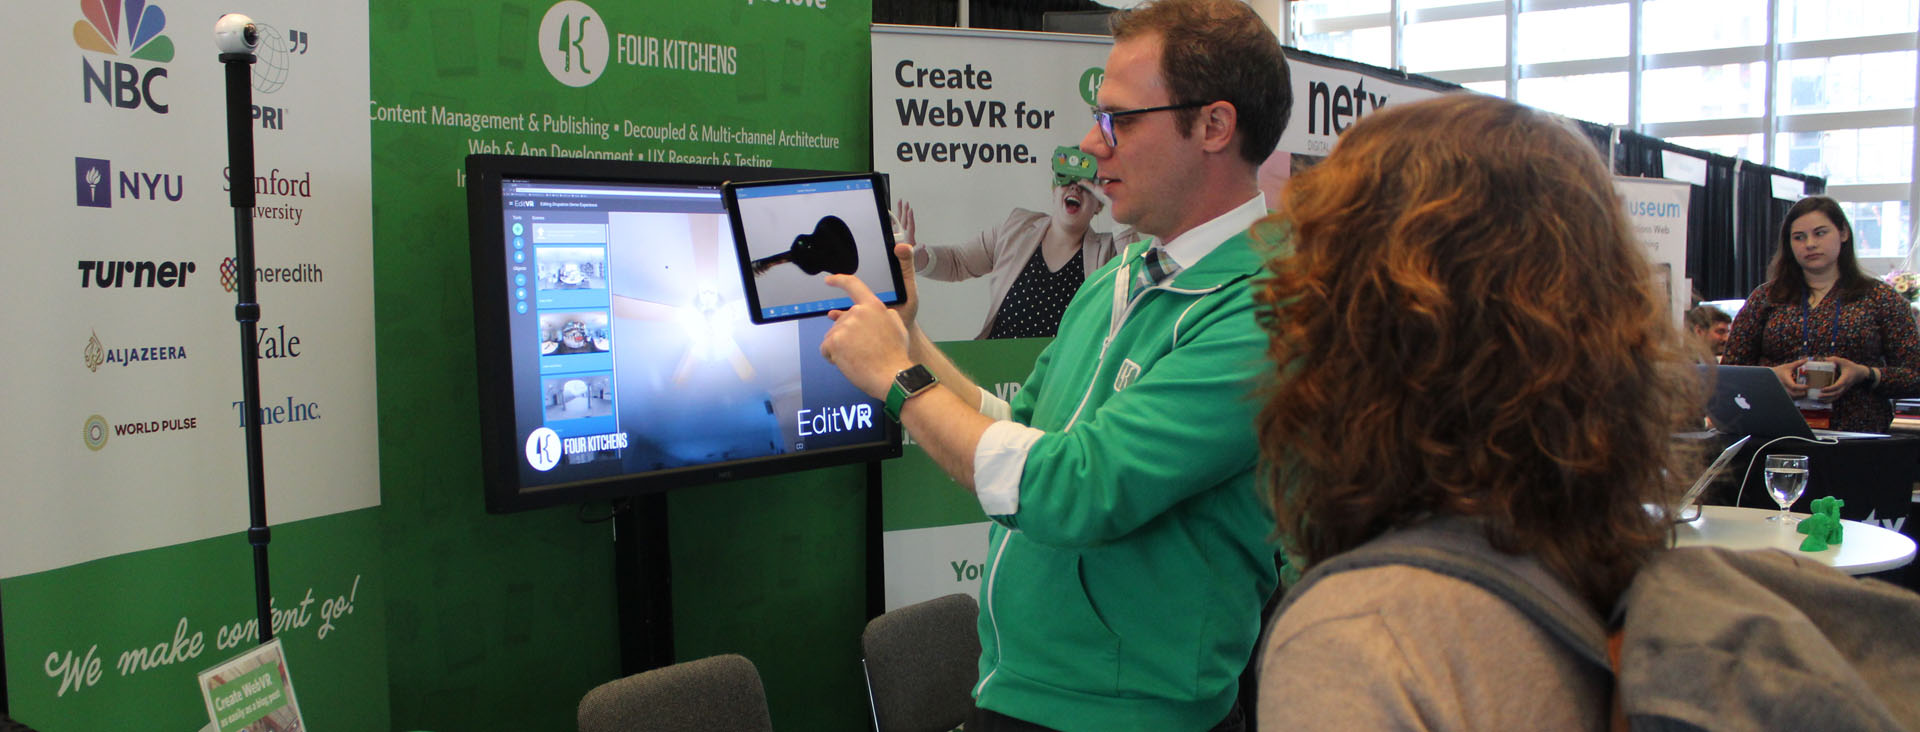 A man in a green sweater does a demonstration on an iPad for a woman in the Vendor Hall at MW18.